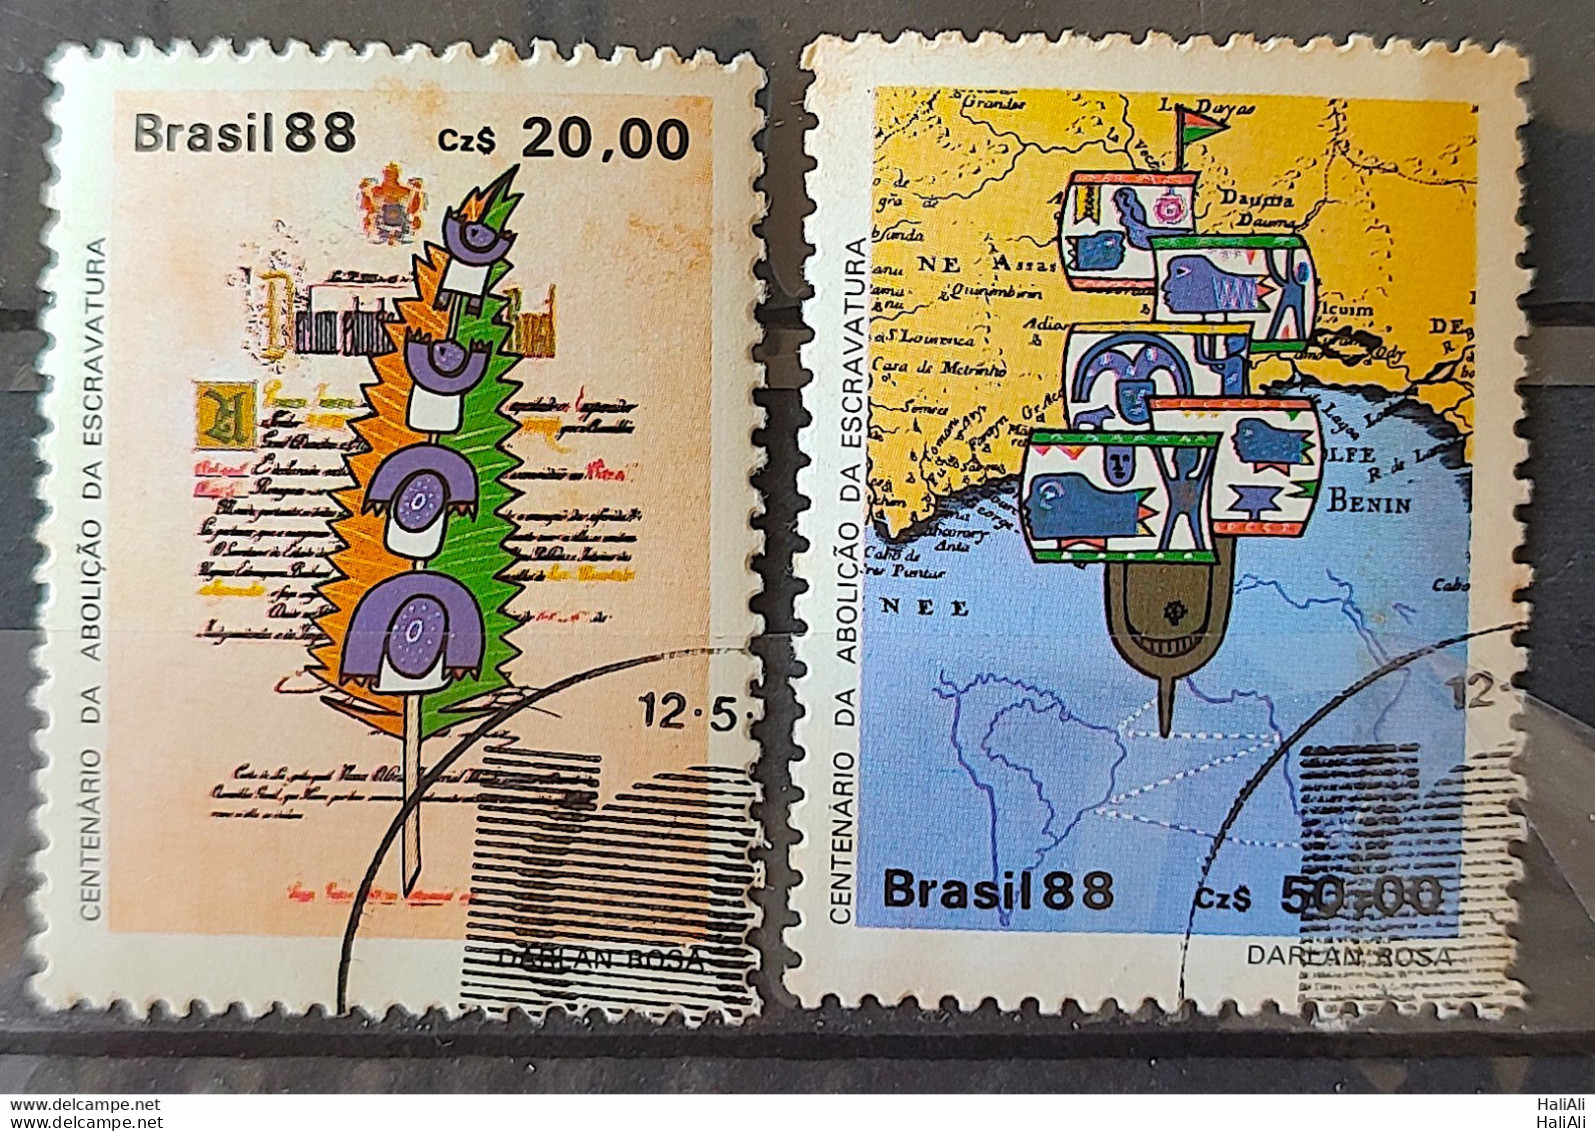 C 1583 Brazil Stamp 100 Years Abolition Of Slavery Law Aurea Ship Slave 1988 Complete Series Circulated 5 - Oblitérés